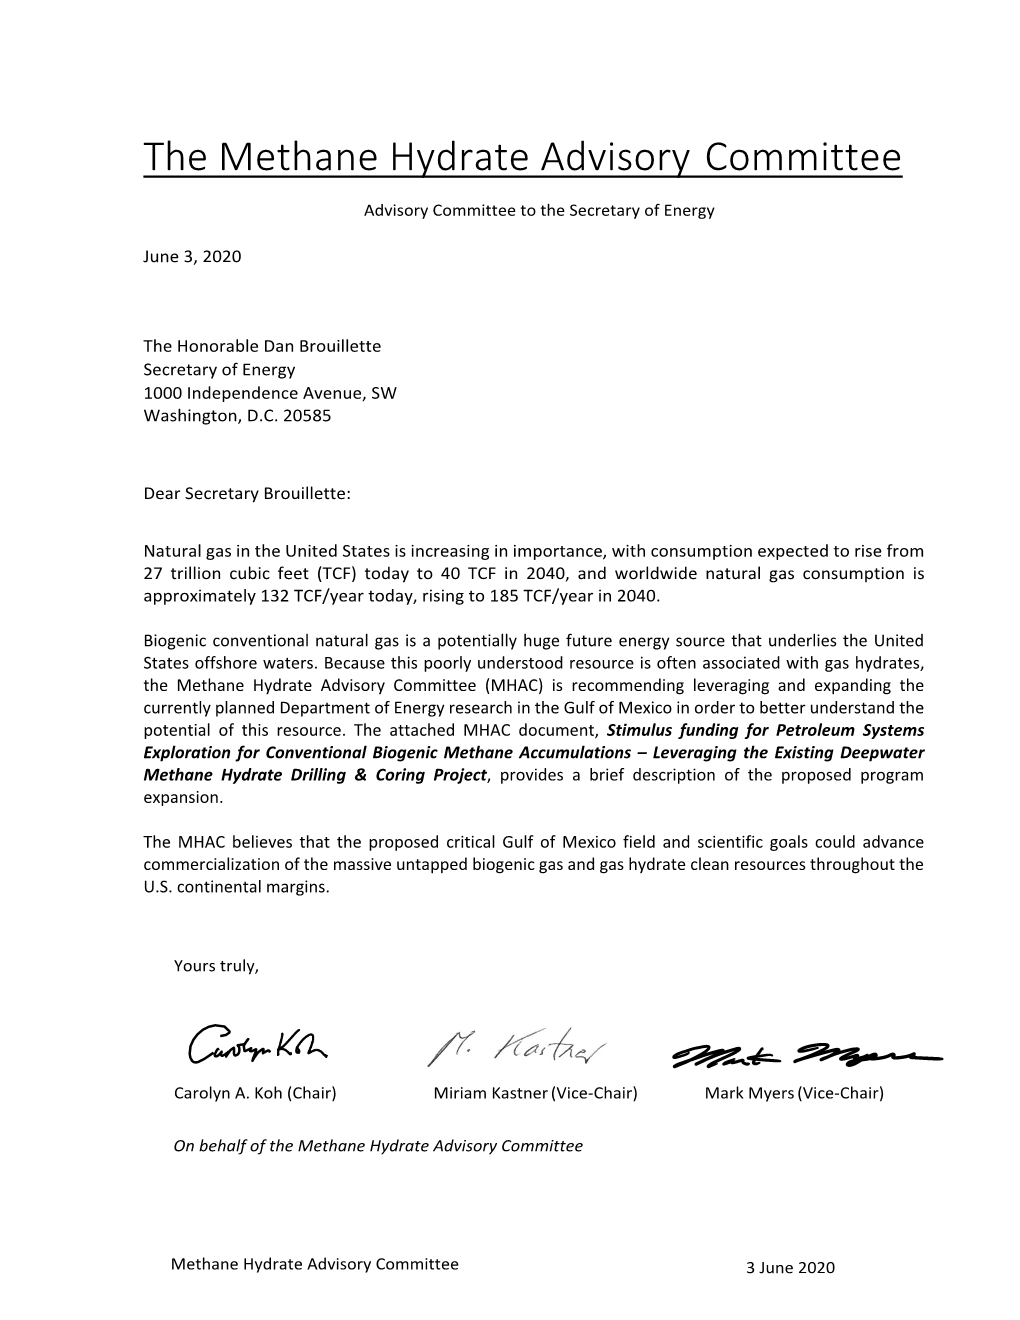 Methane Hydrate Advisory Committee, June 3, 2020, Recommendations to the Secretary of Energy